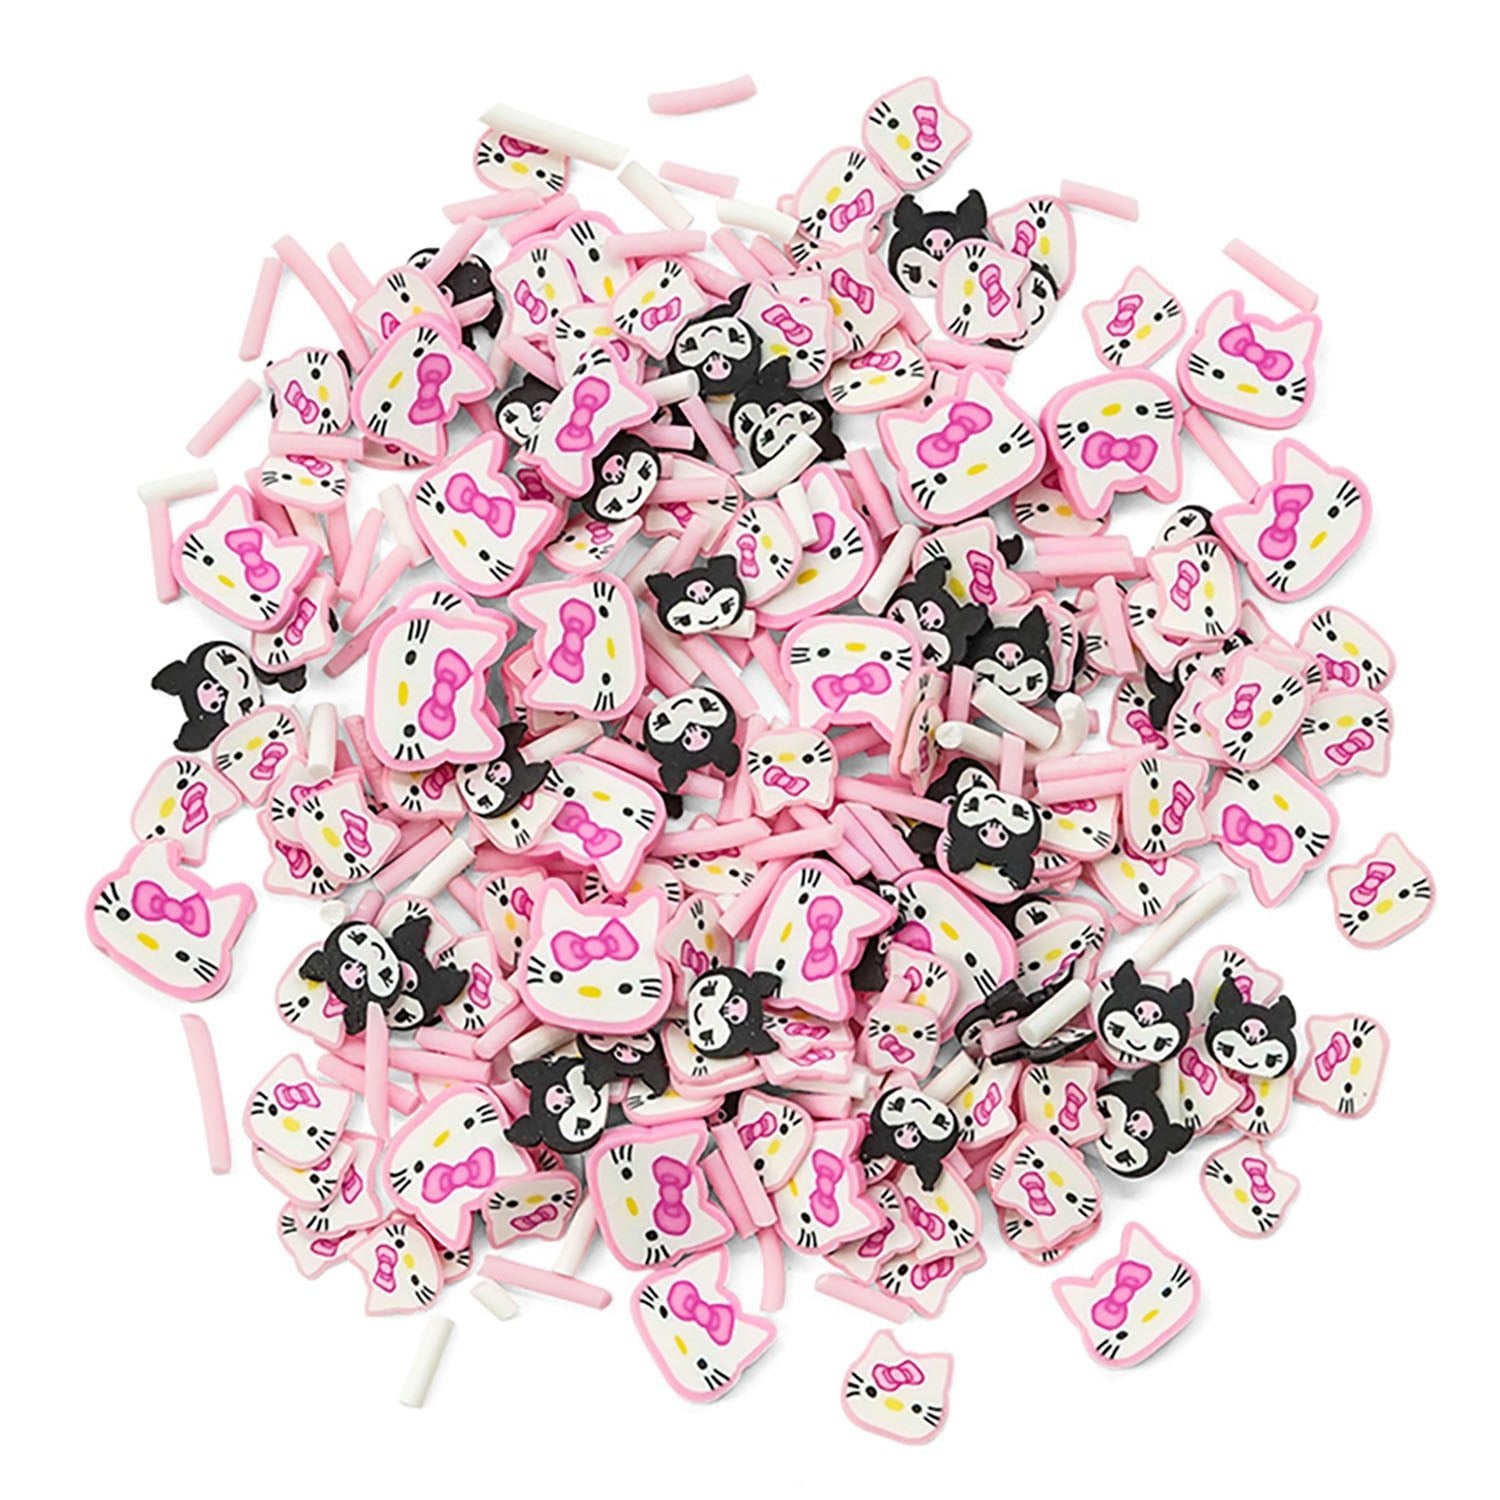 Here Kitty - Buttons Galore and More